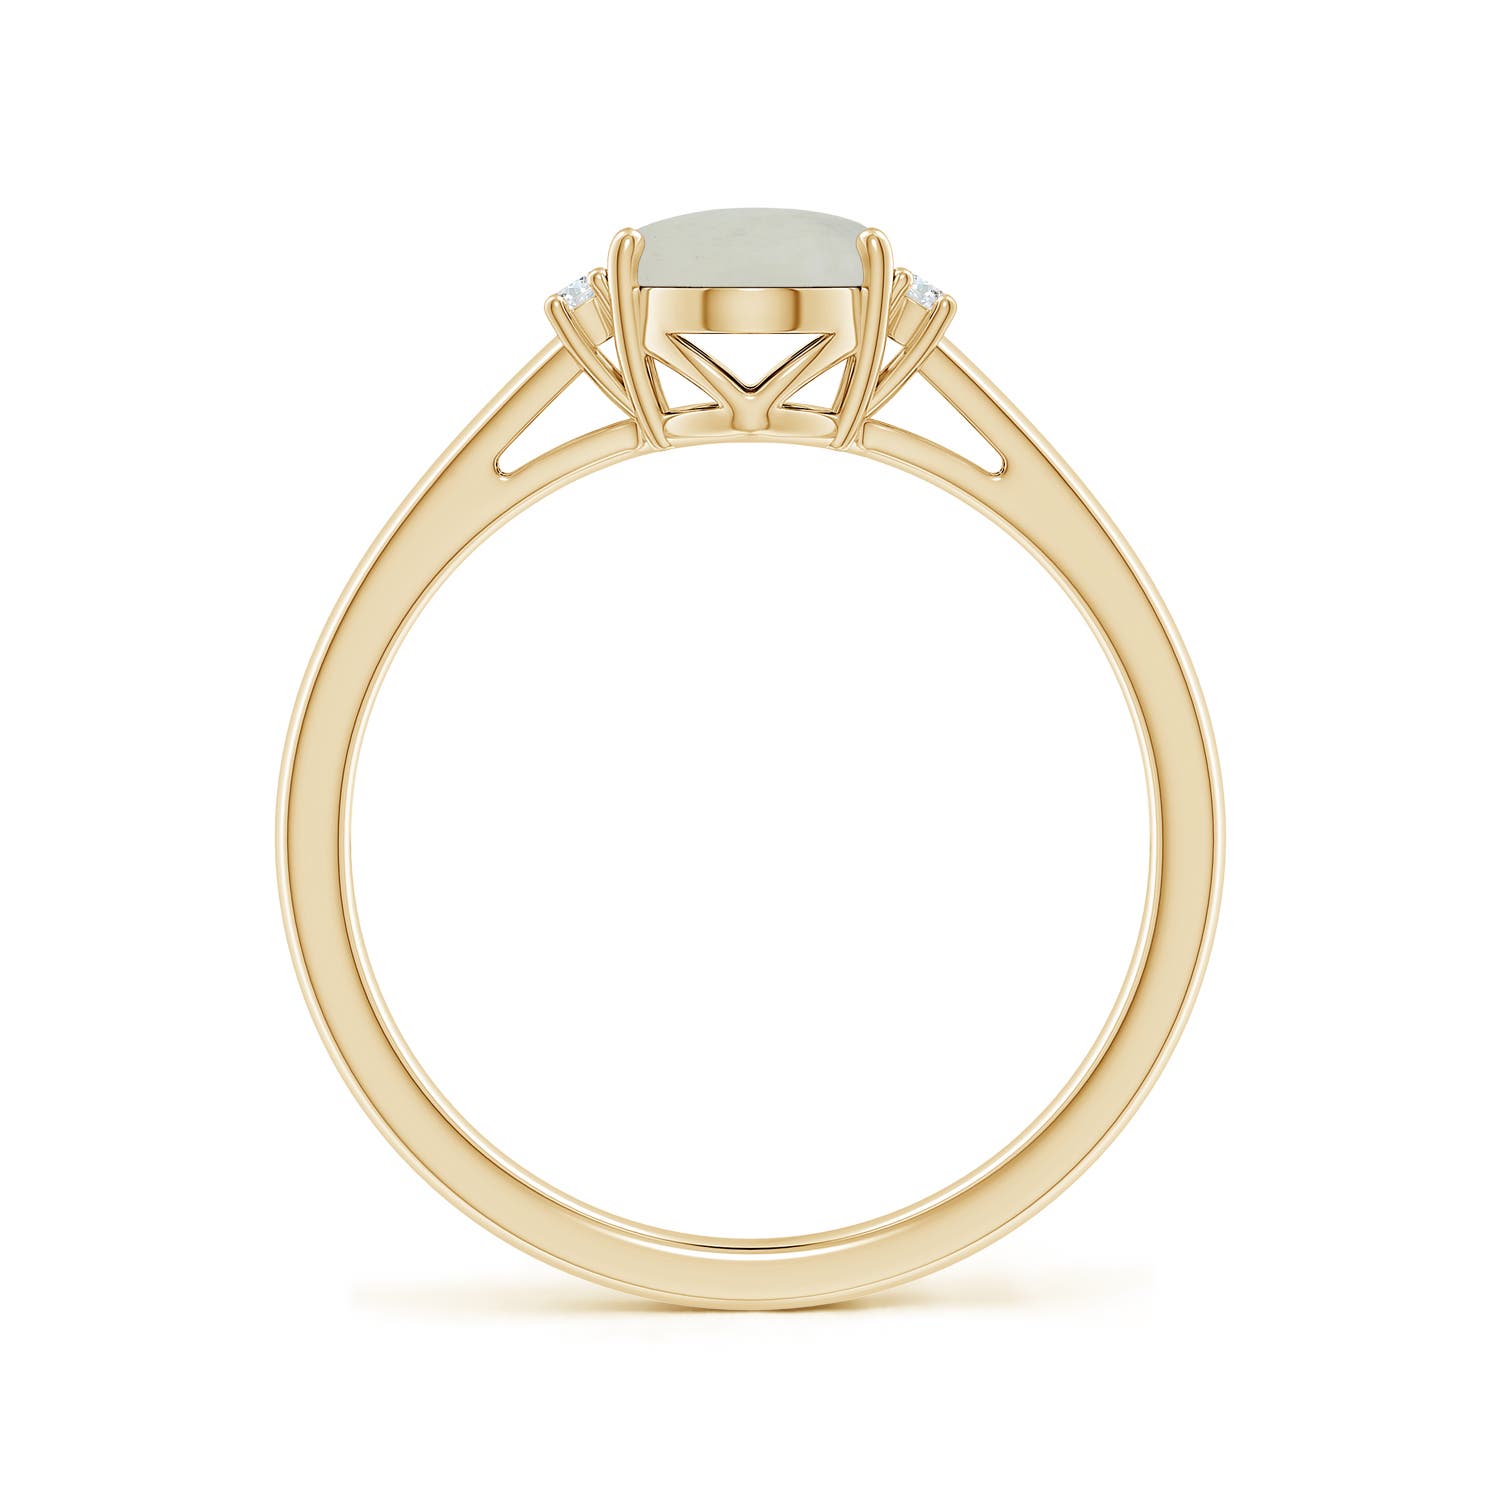 A - Moonstone / 1.17 CT / 14 KT Yellow Gold